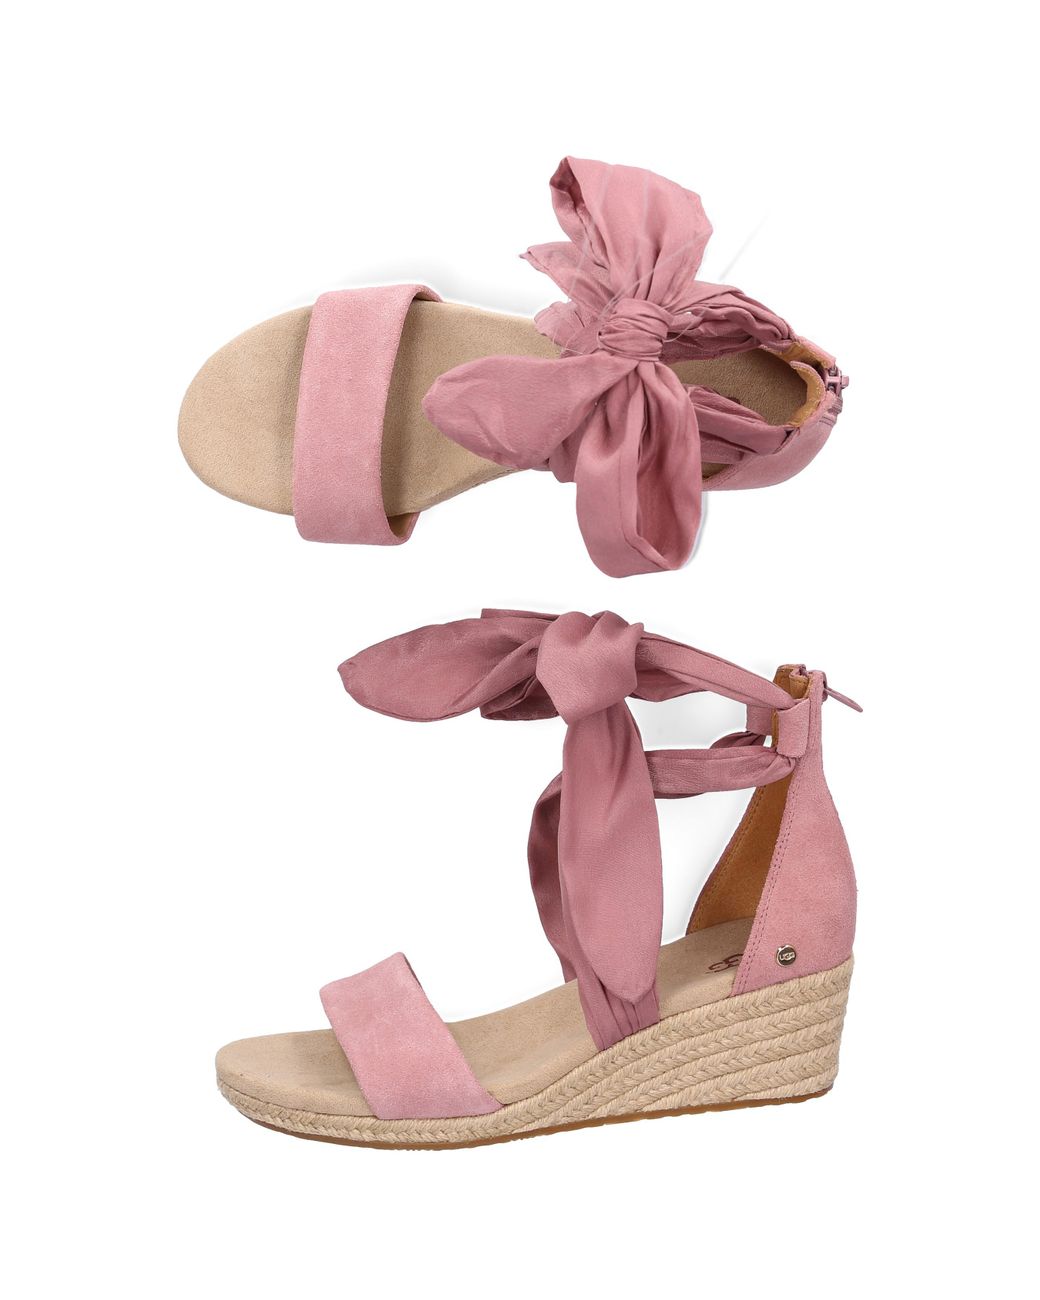 rose pink wedge shoes